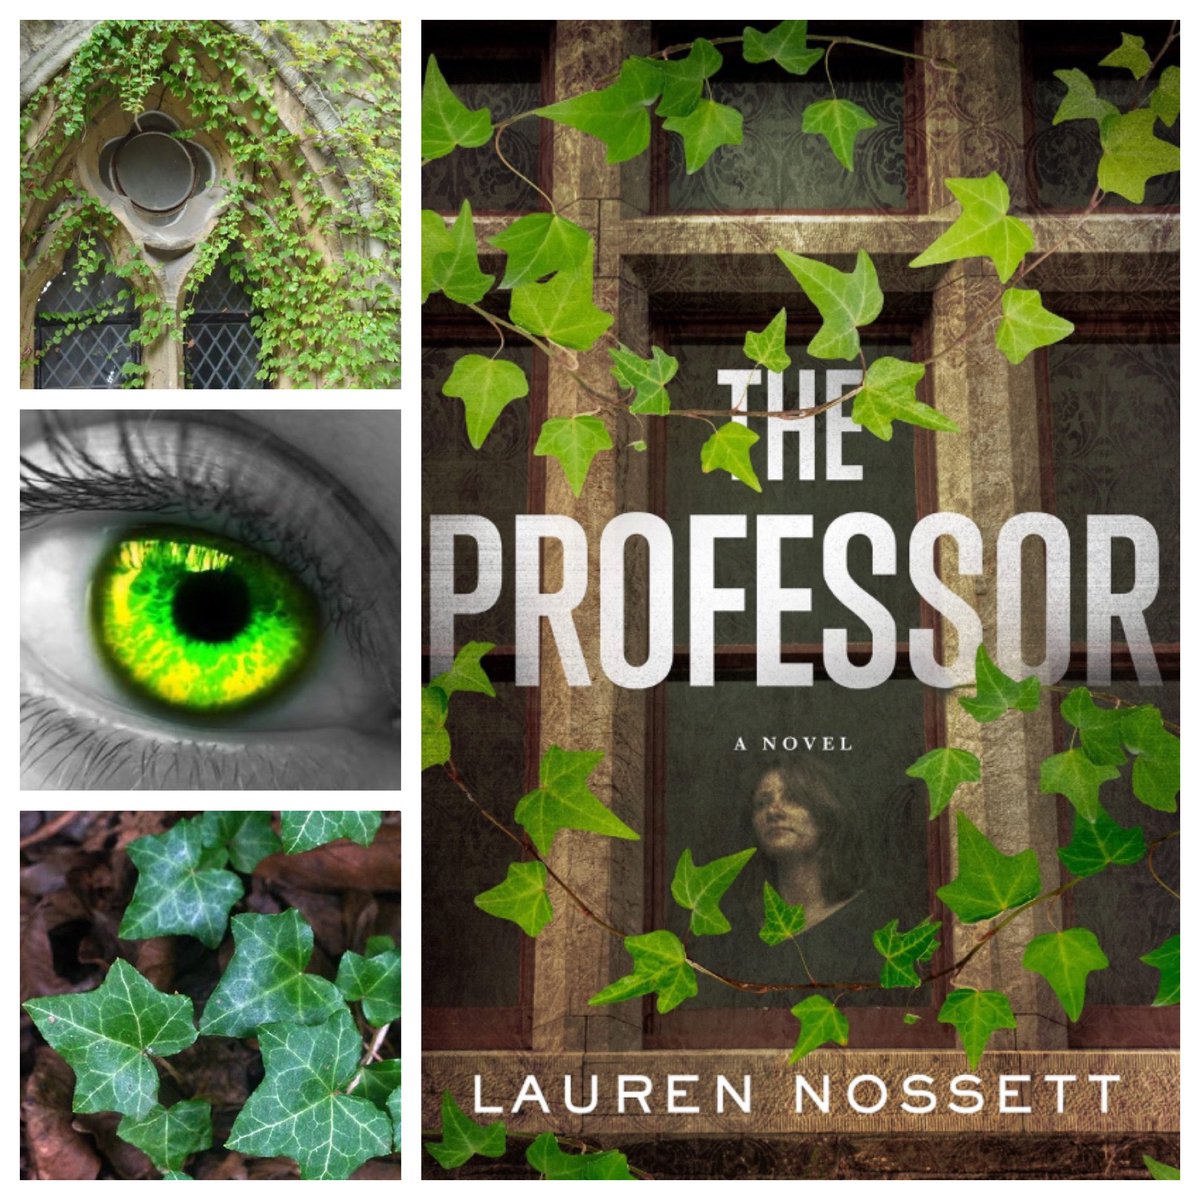 Thanks to #FlatironBooks for the preview of #LaurenNossett ‘s #TheProfessor coming in November. I enjoyed her last campus mystery #TheResemblance and I’m thrilled that Marrit Kaplan is back! #NetGalley #BookTwitter